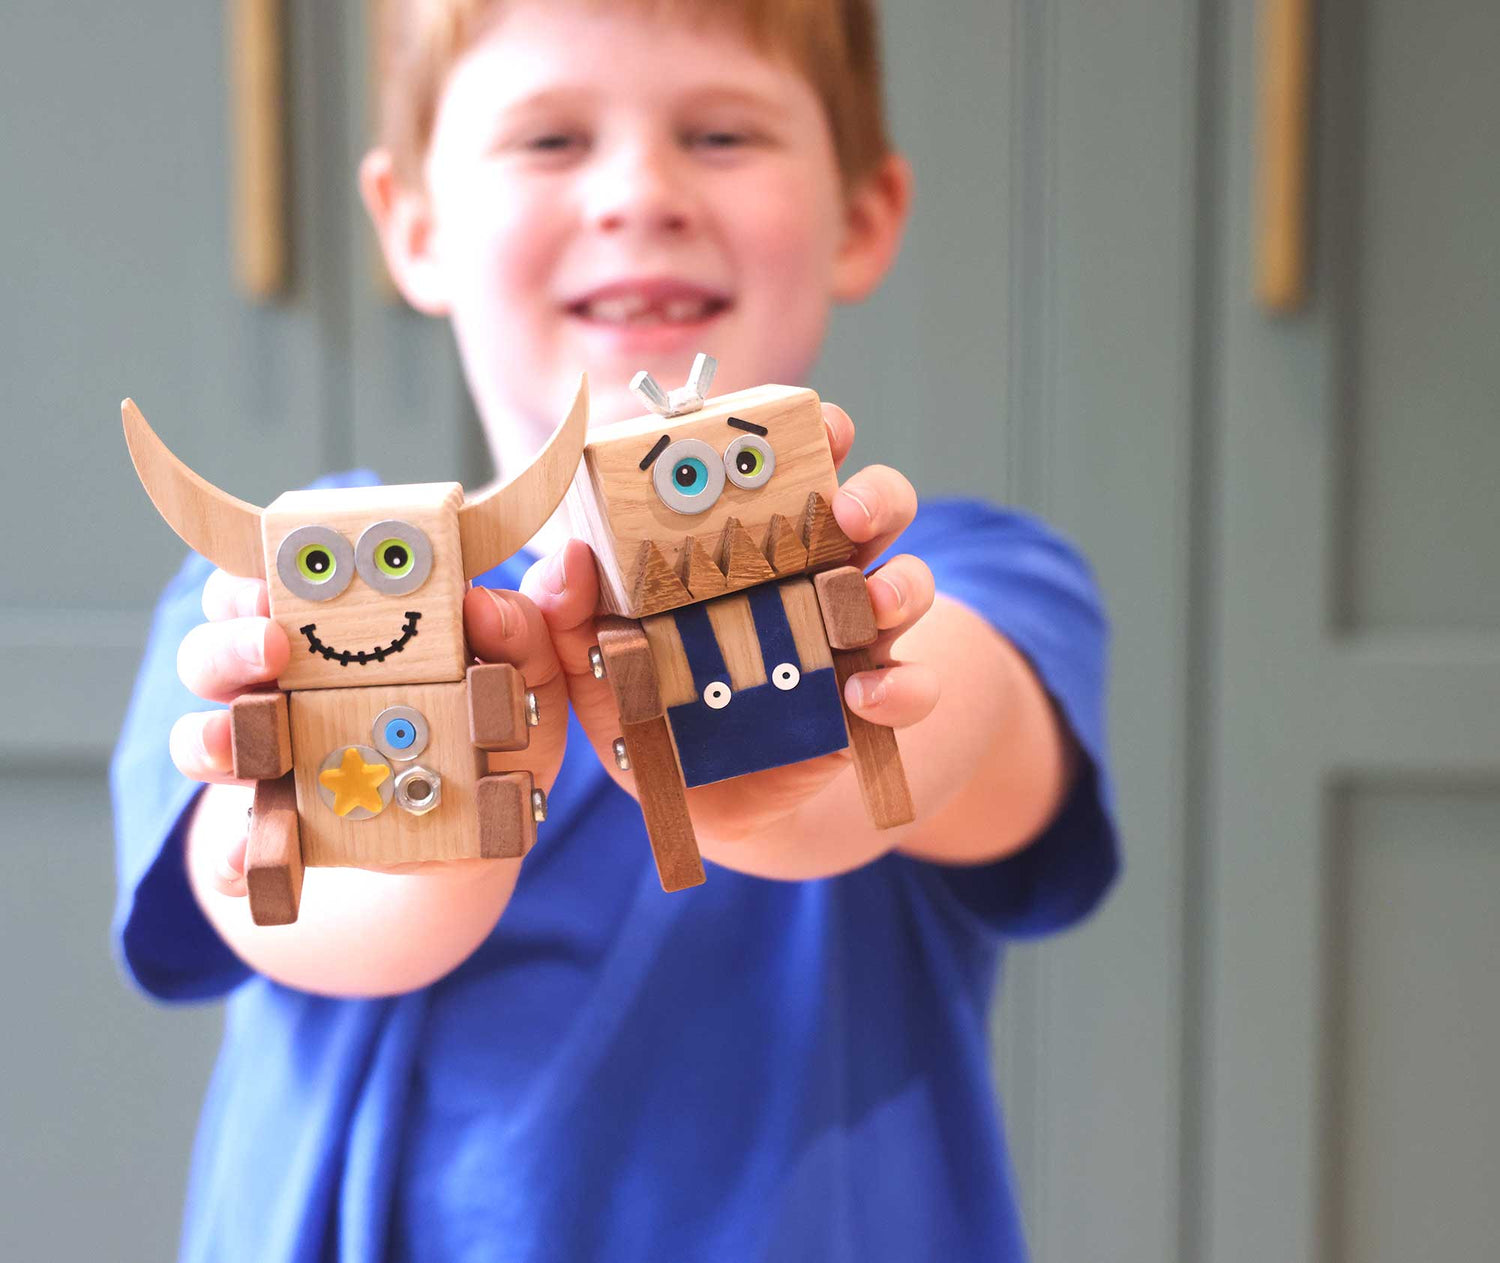 Creative wood craft kits and workshops for kids